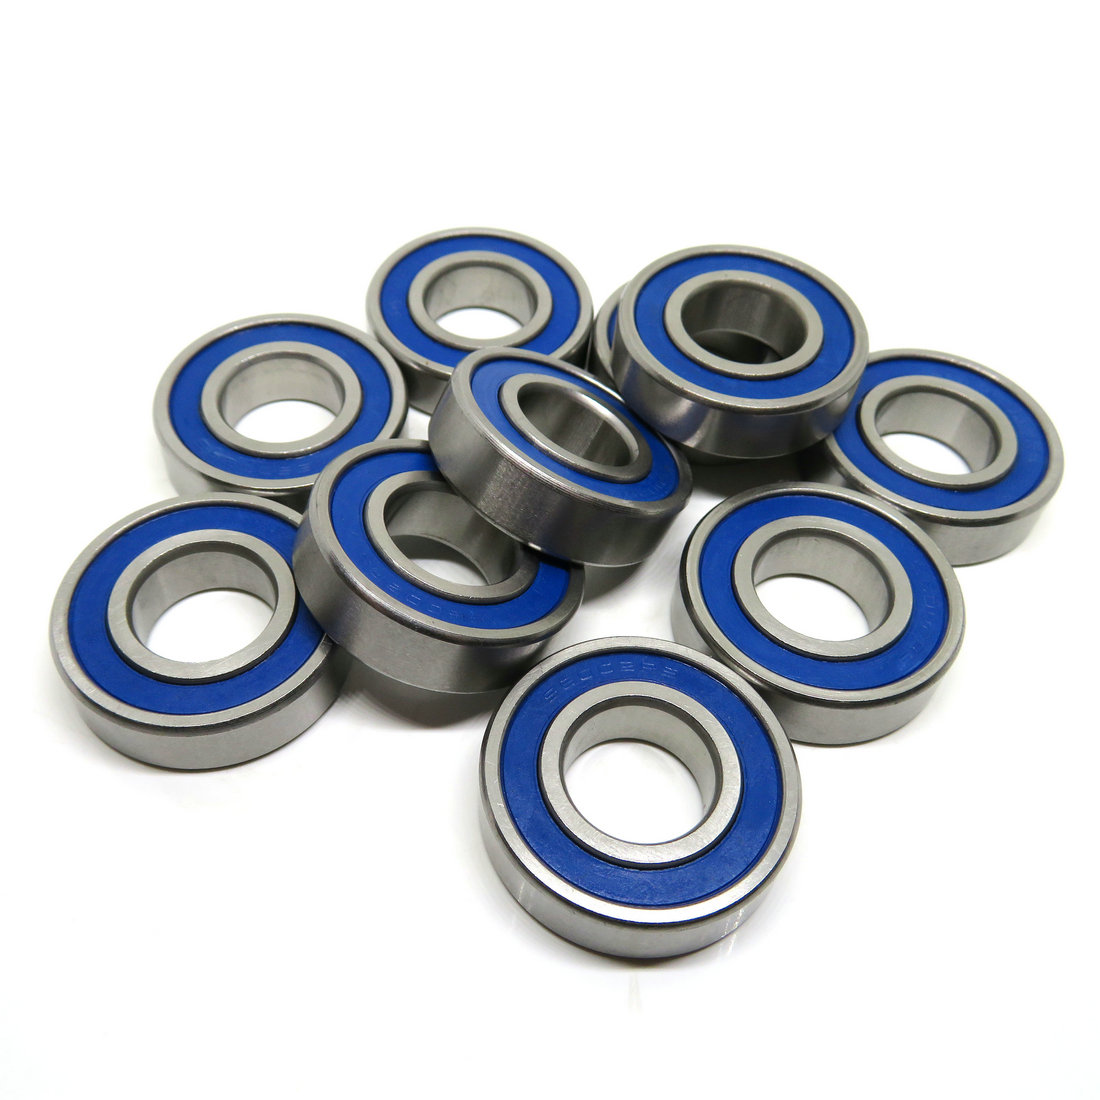 High resistance to corrosion S6002-2RS Stainless Steel Ball Bearing Sealed 15x32x9 S6002 RS.jpg